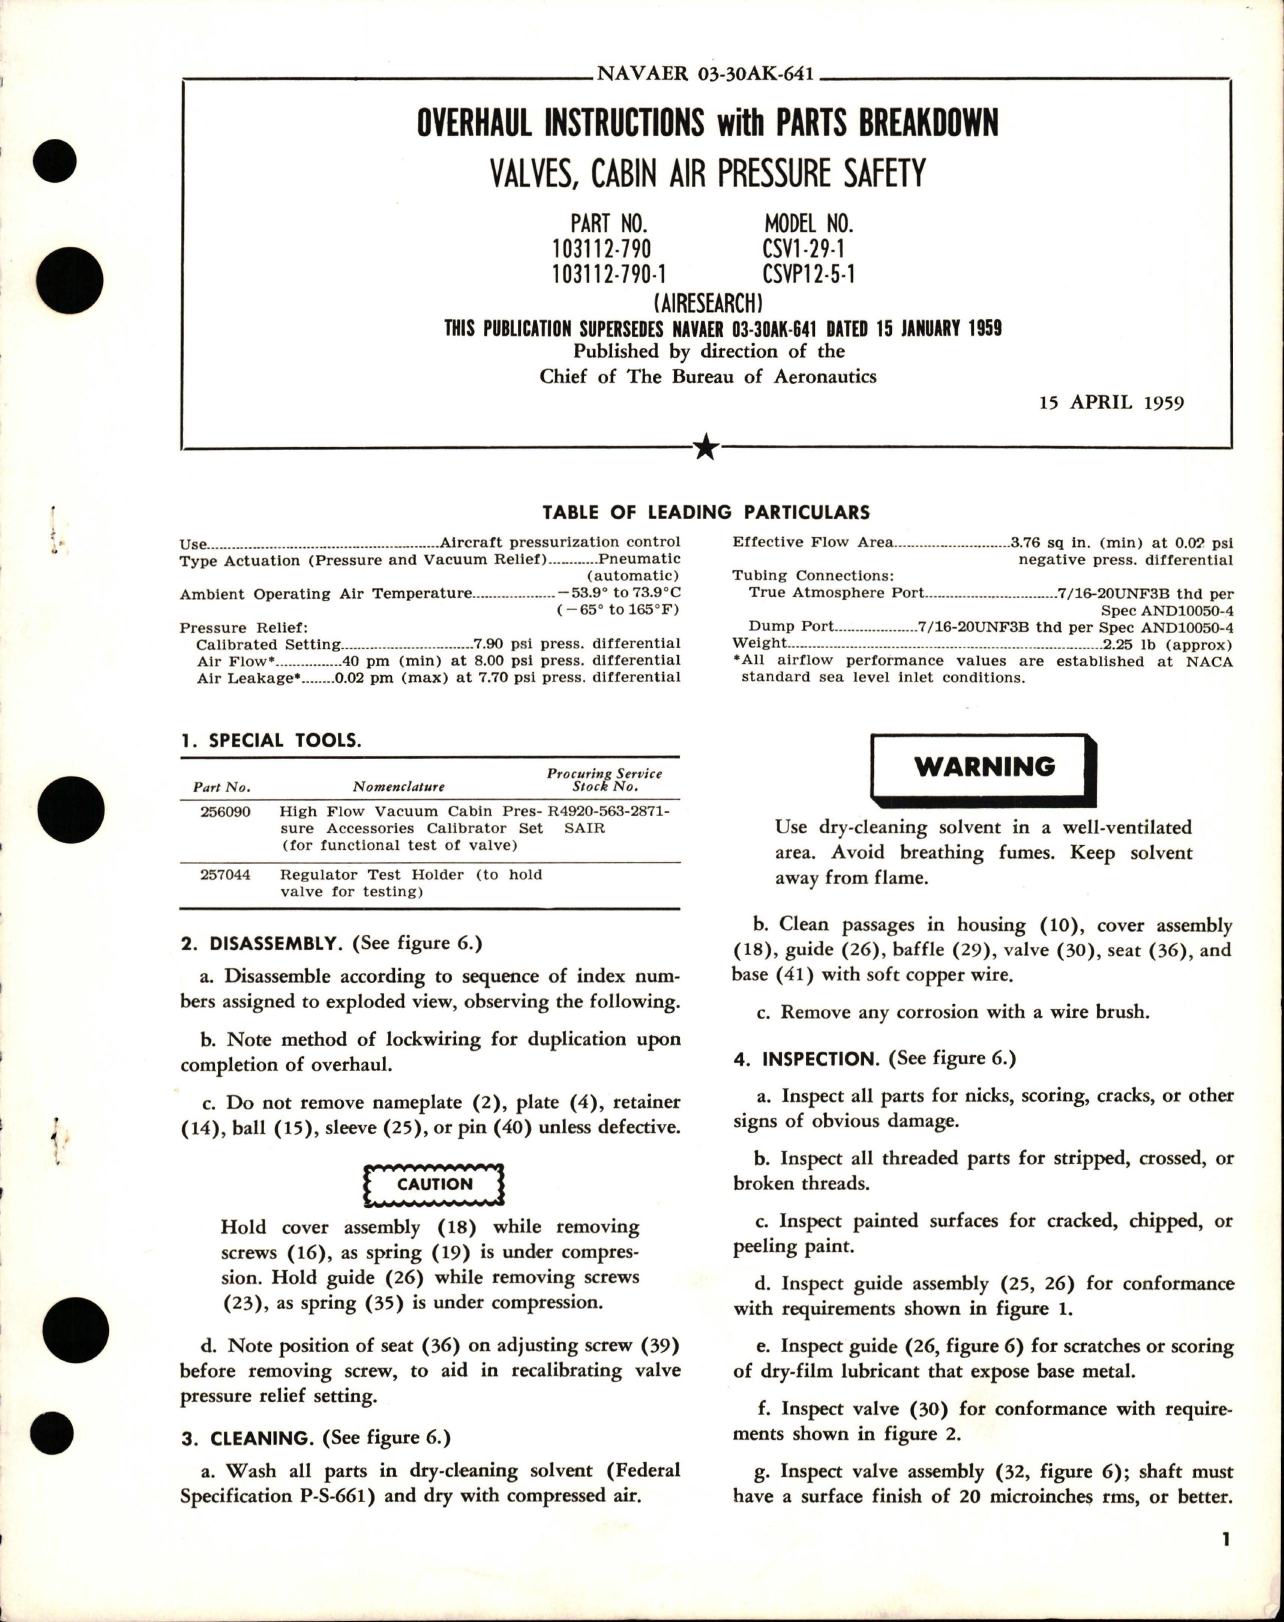 Sample page 1 from AirCorps Library document: Overhaul Instructions with Parts Breakdown for Cabin Air Pressure Safety - Parts 103112-790 and 103112-790-1 - Models CSV1-29-1 and CSVP12-5-1